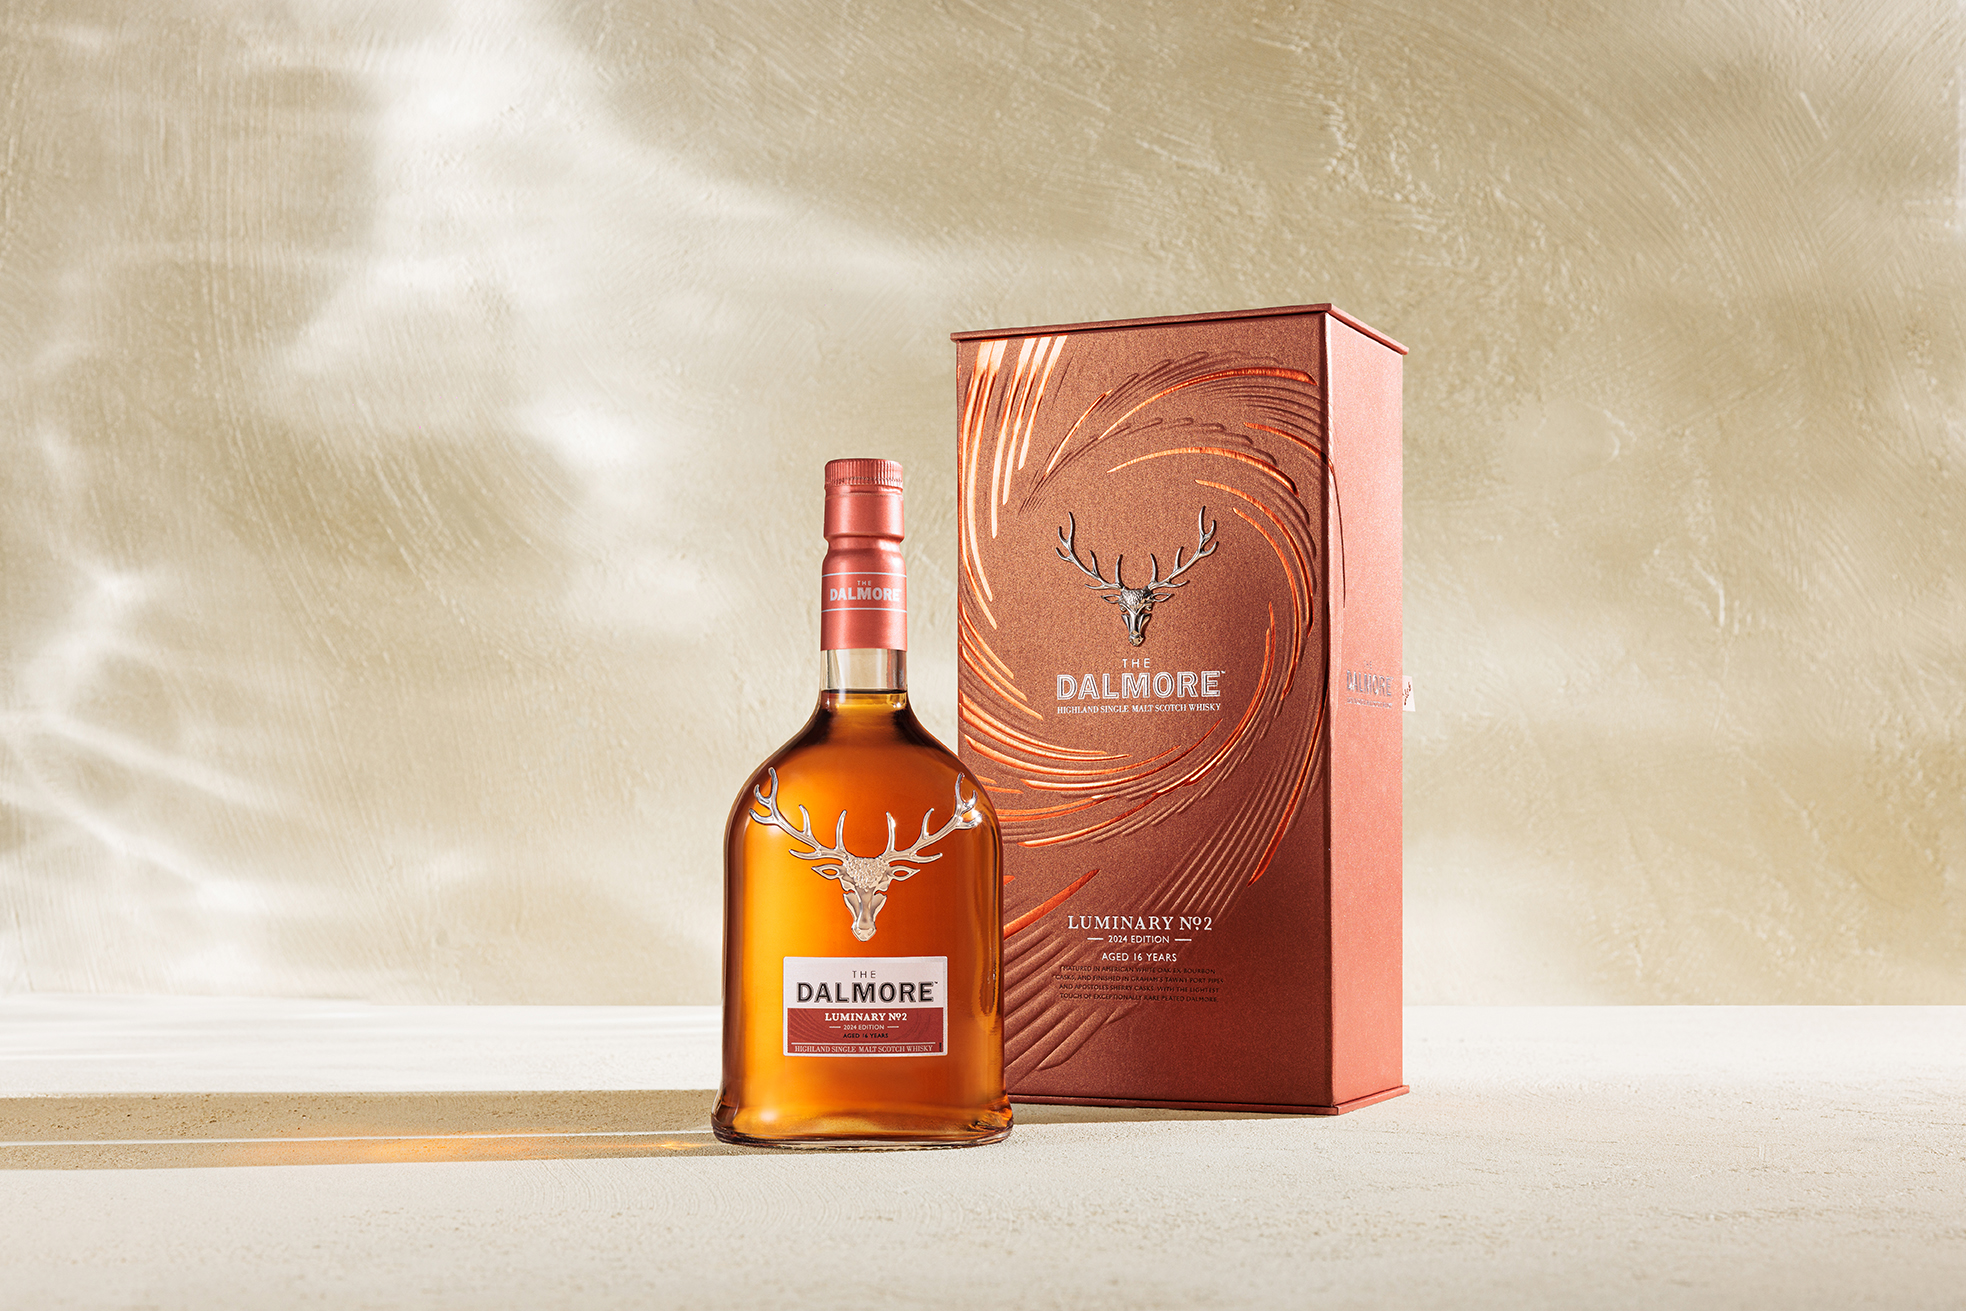 The Dalmore Luminary No.2 whisky bottle and packaging